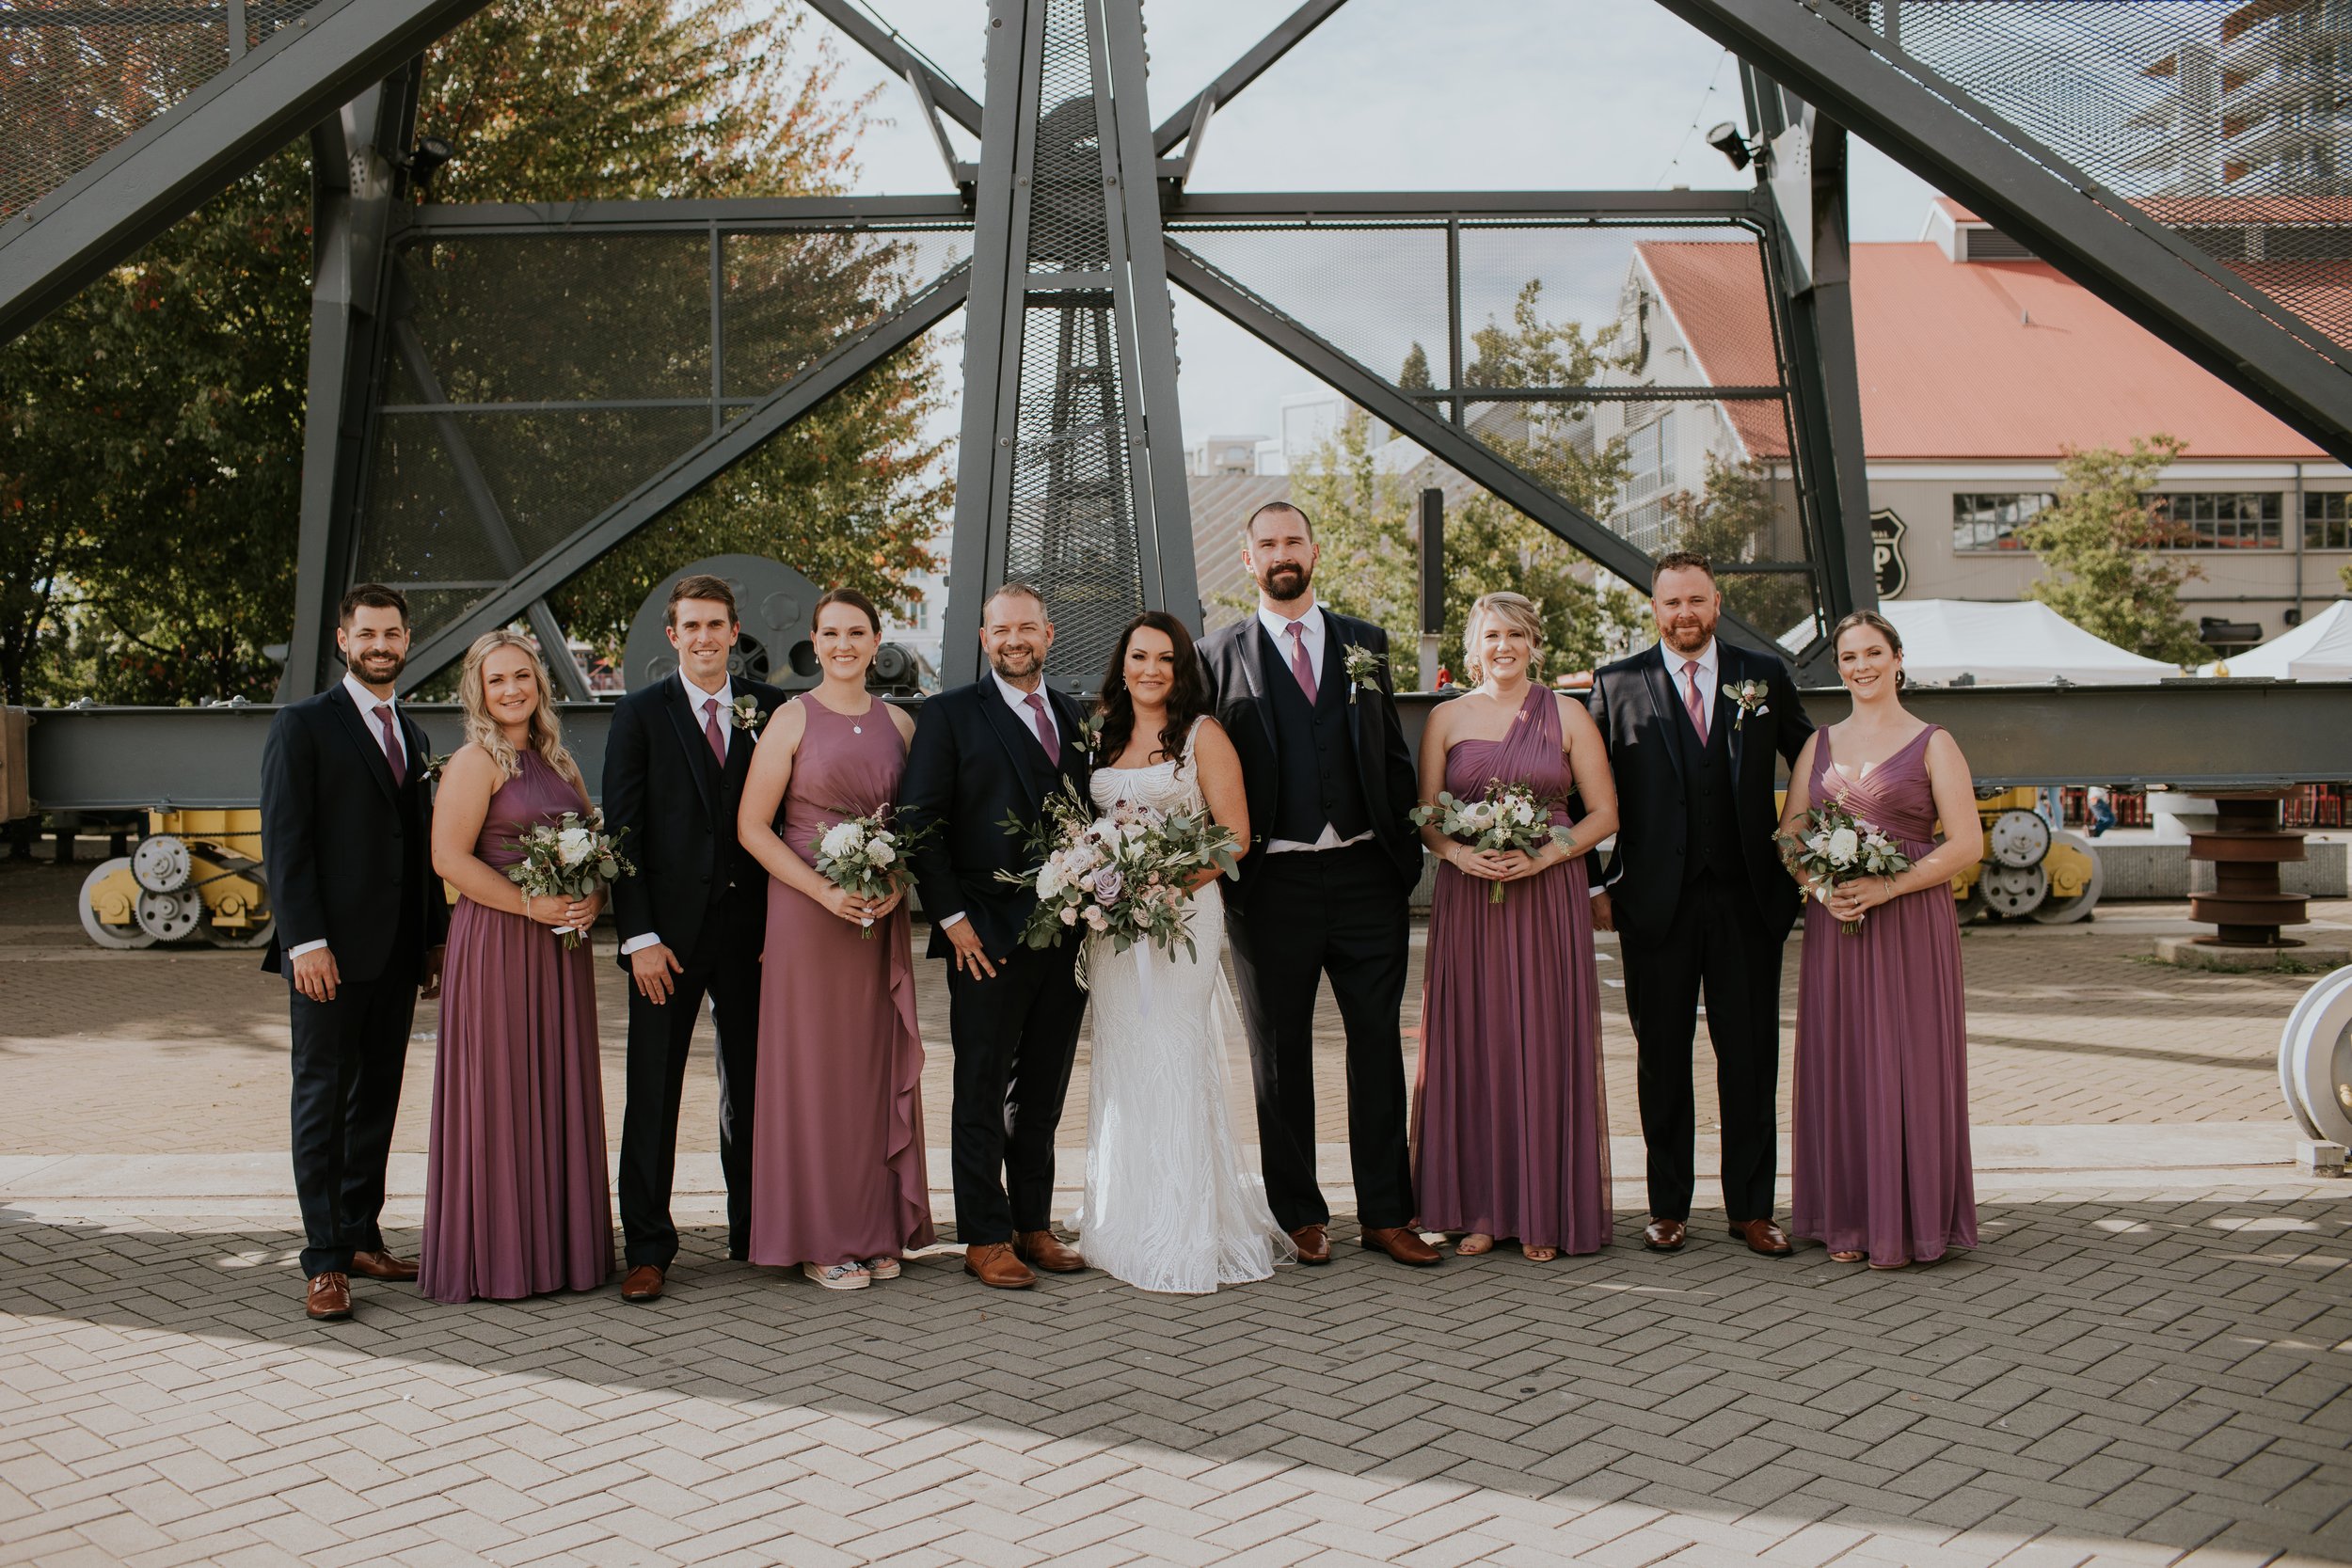  blush wedding , mauve wedding , blush and mauve wedding , the Wallace , north Vancouver , wedding florist  , bride , groom ,  wedding party , boutonniere , bridal bouquet , bridesmaids bouquets , arch , ceremony , neon sign  , flower installation , 